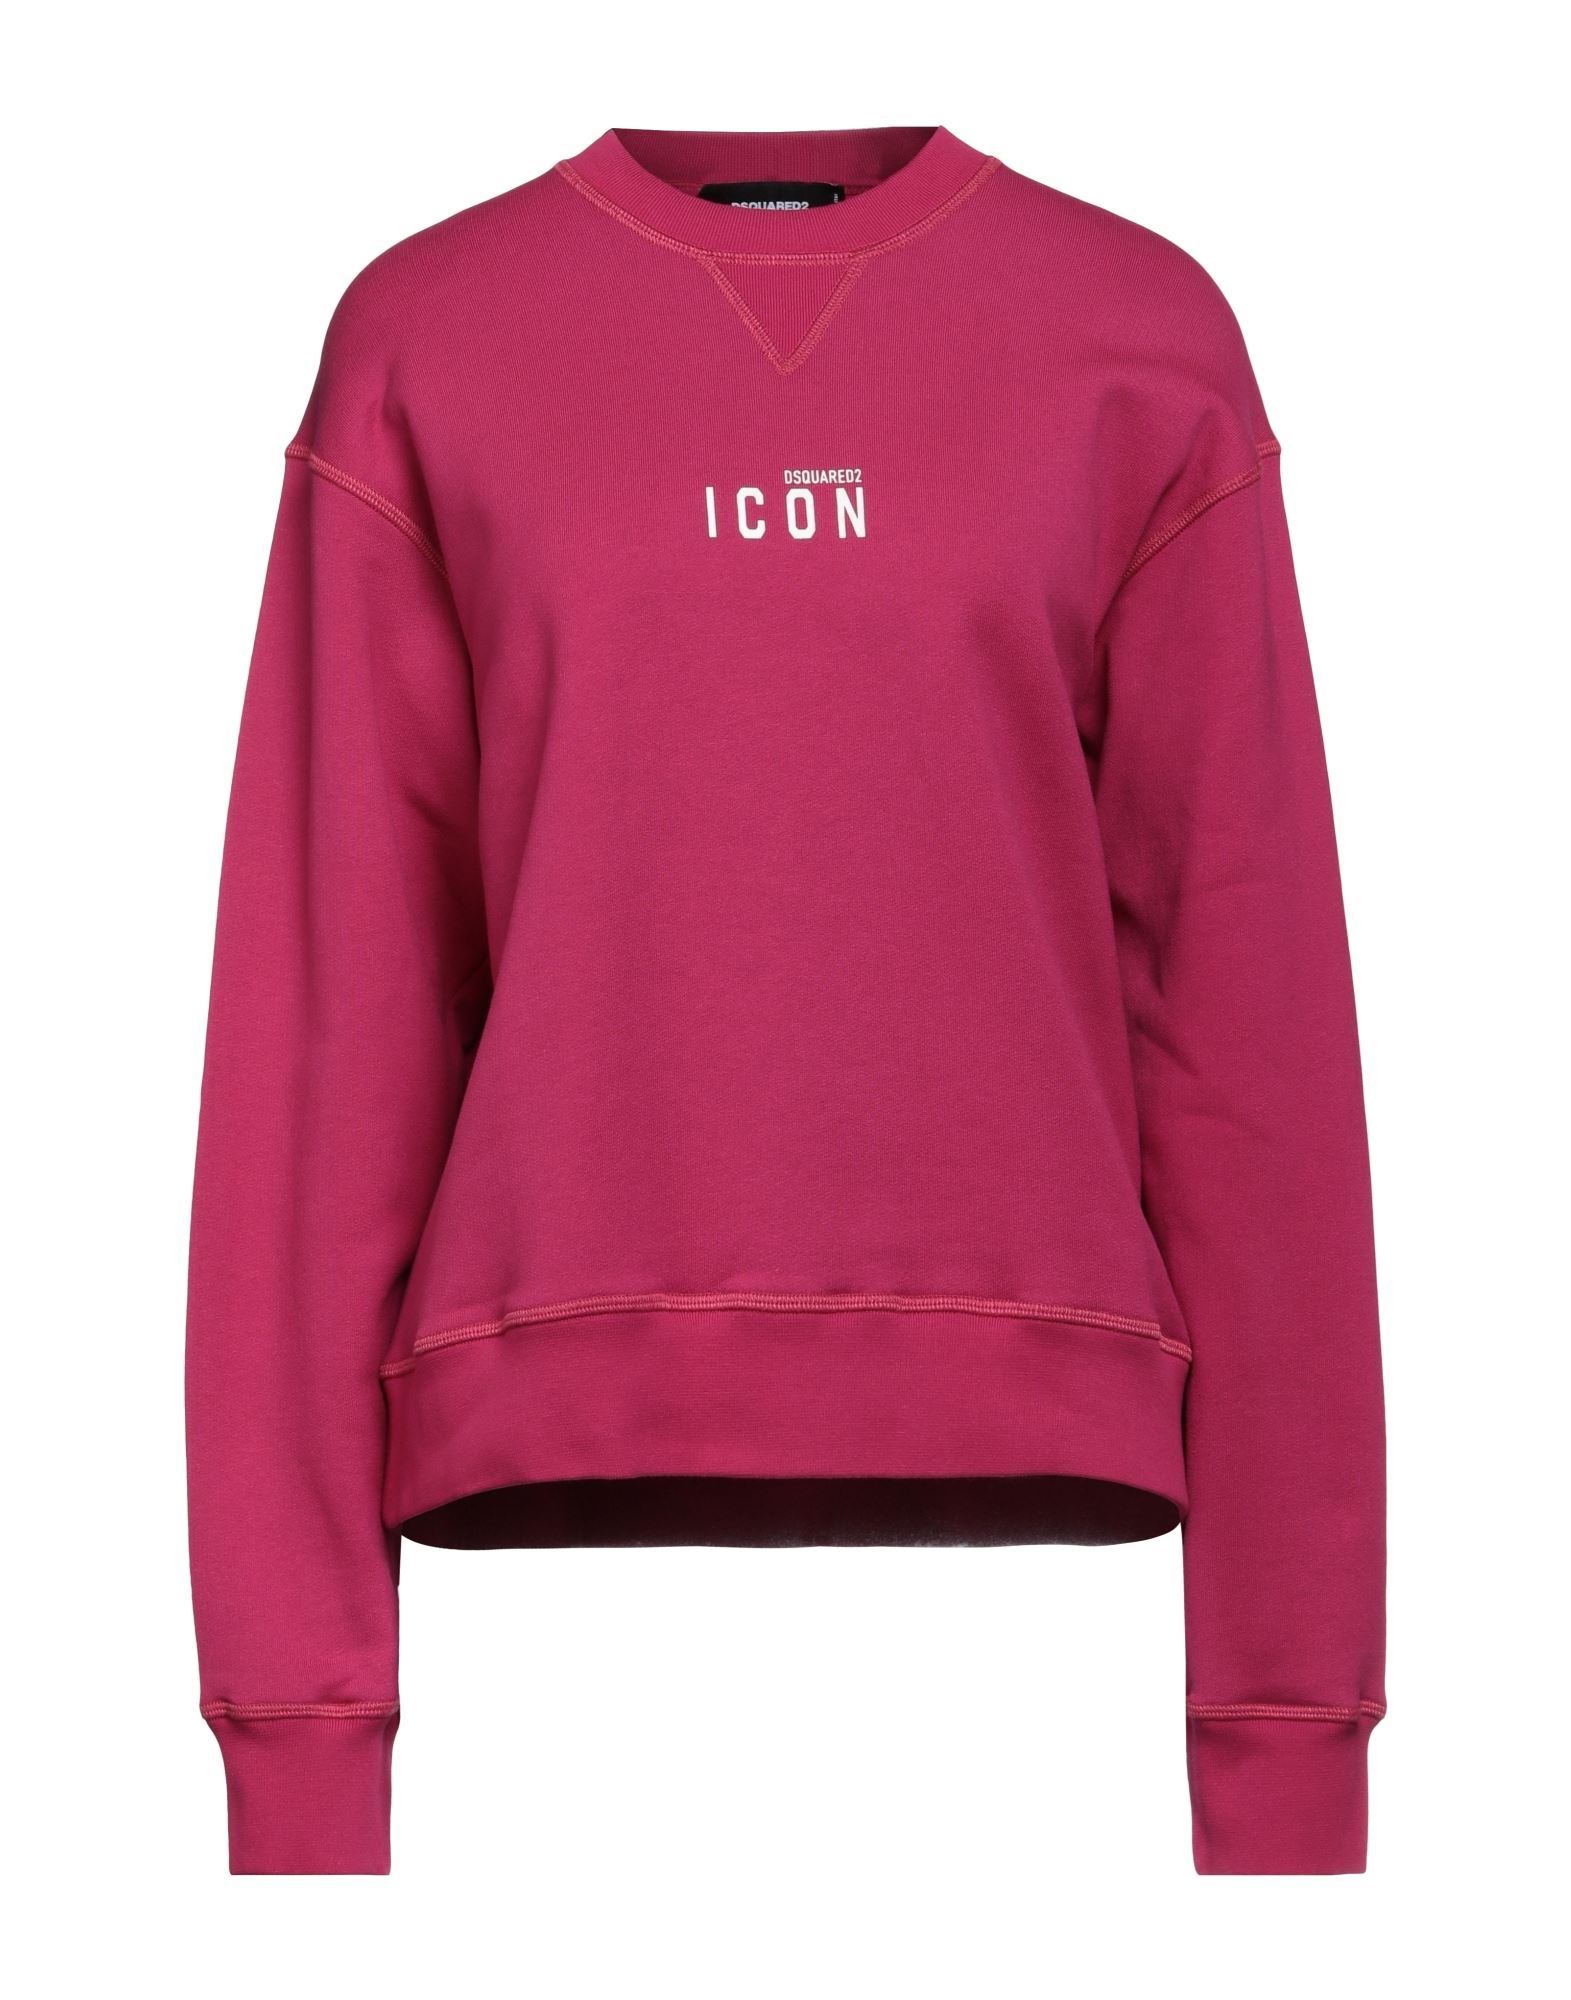 Dsquared2 Sweatshirts In Pink